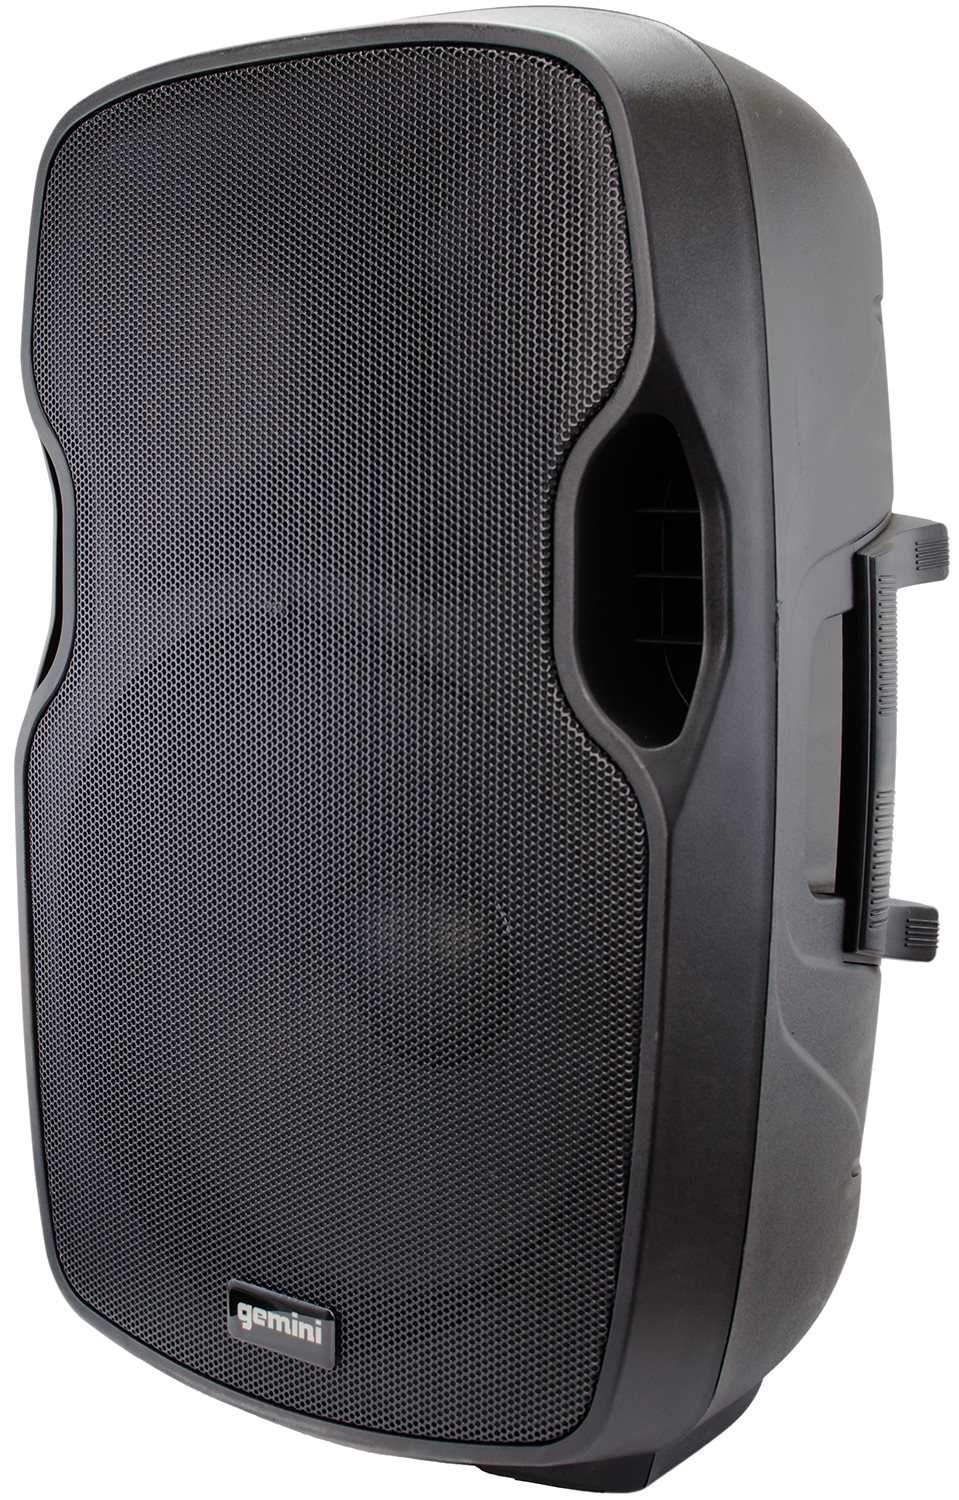 Gemini AS-15 15-Inch Passive Speaker - ProSound and Stage Lighting